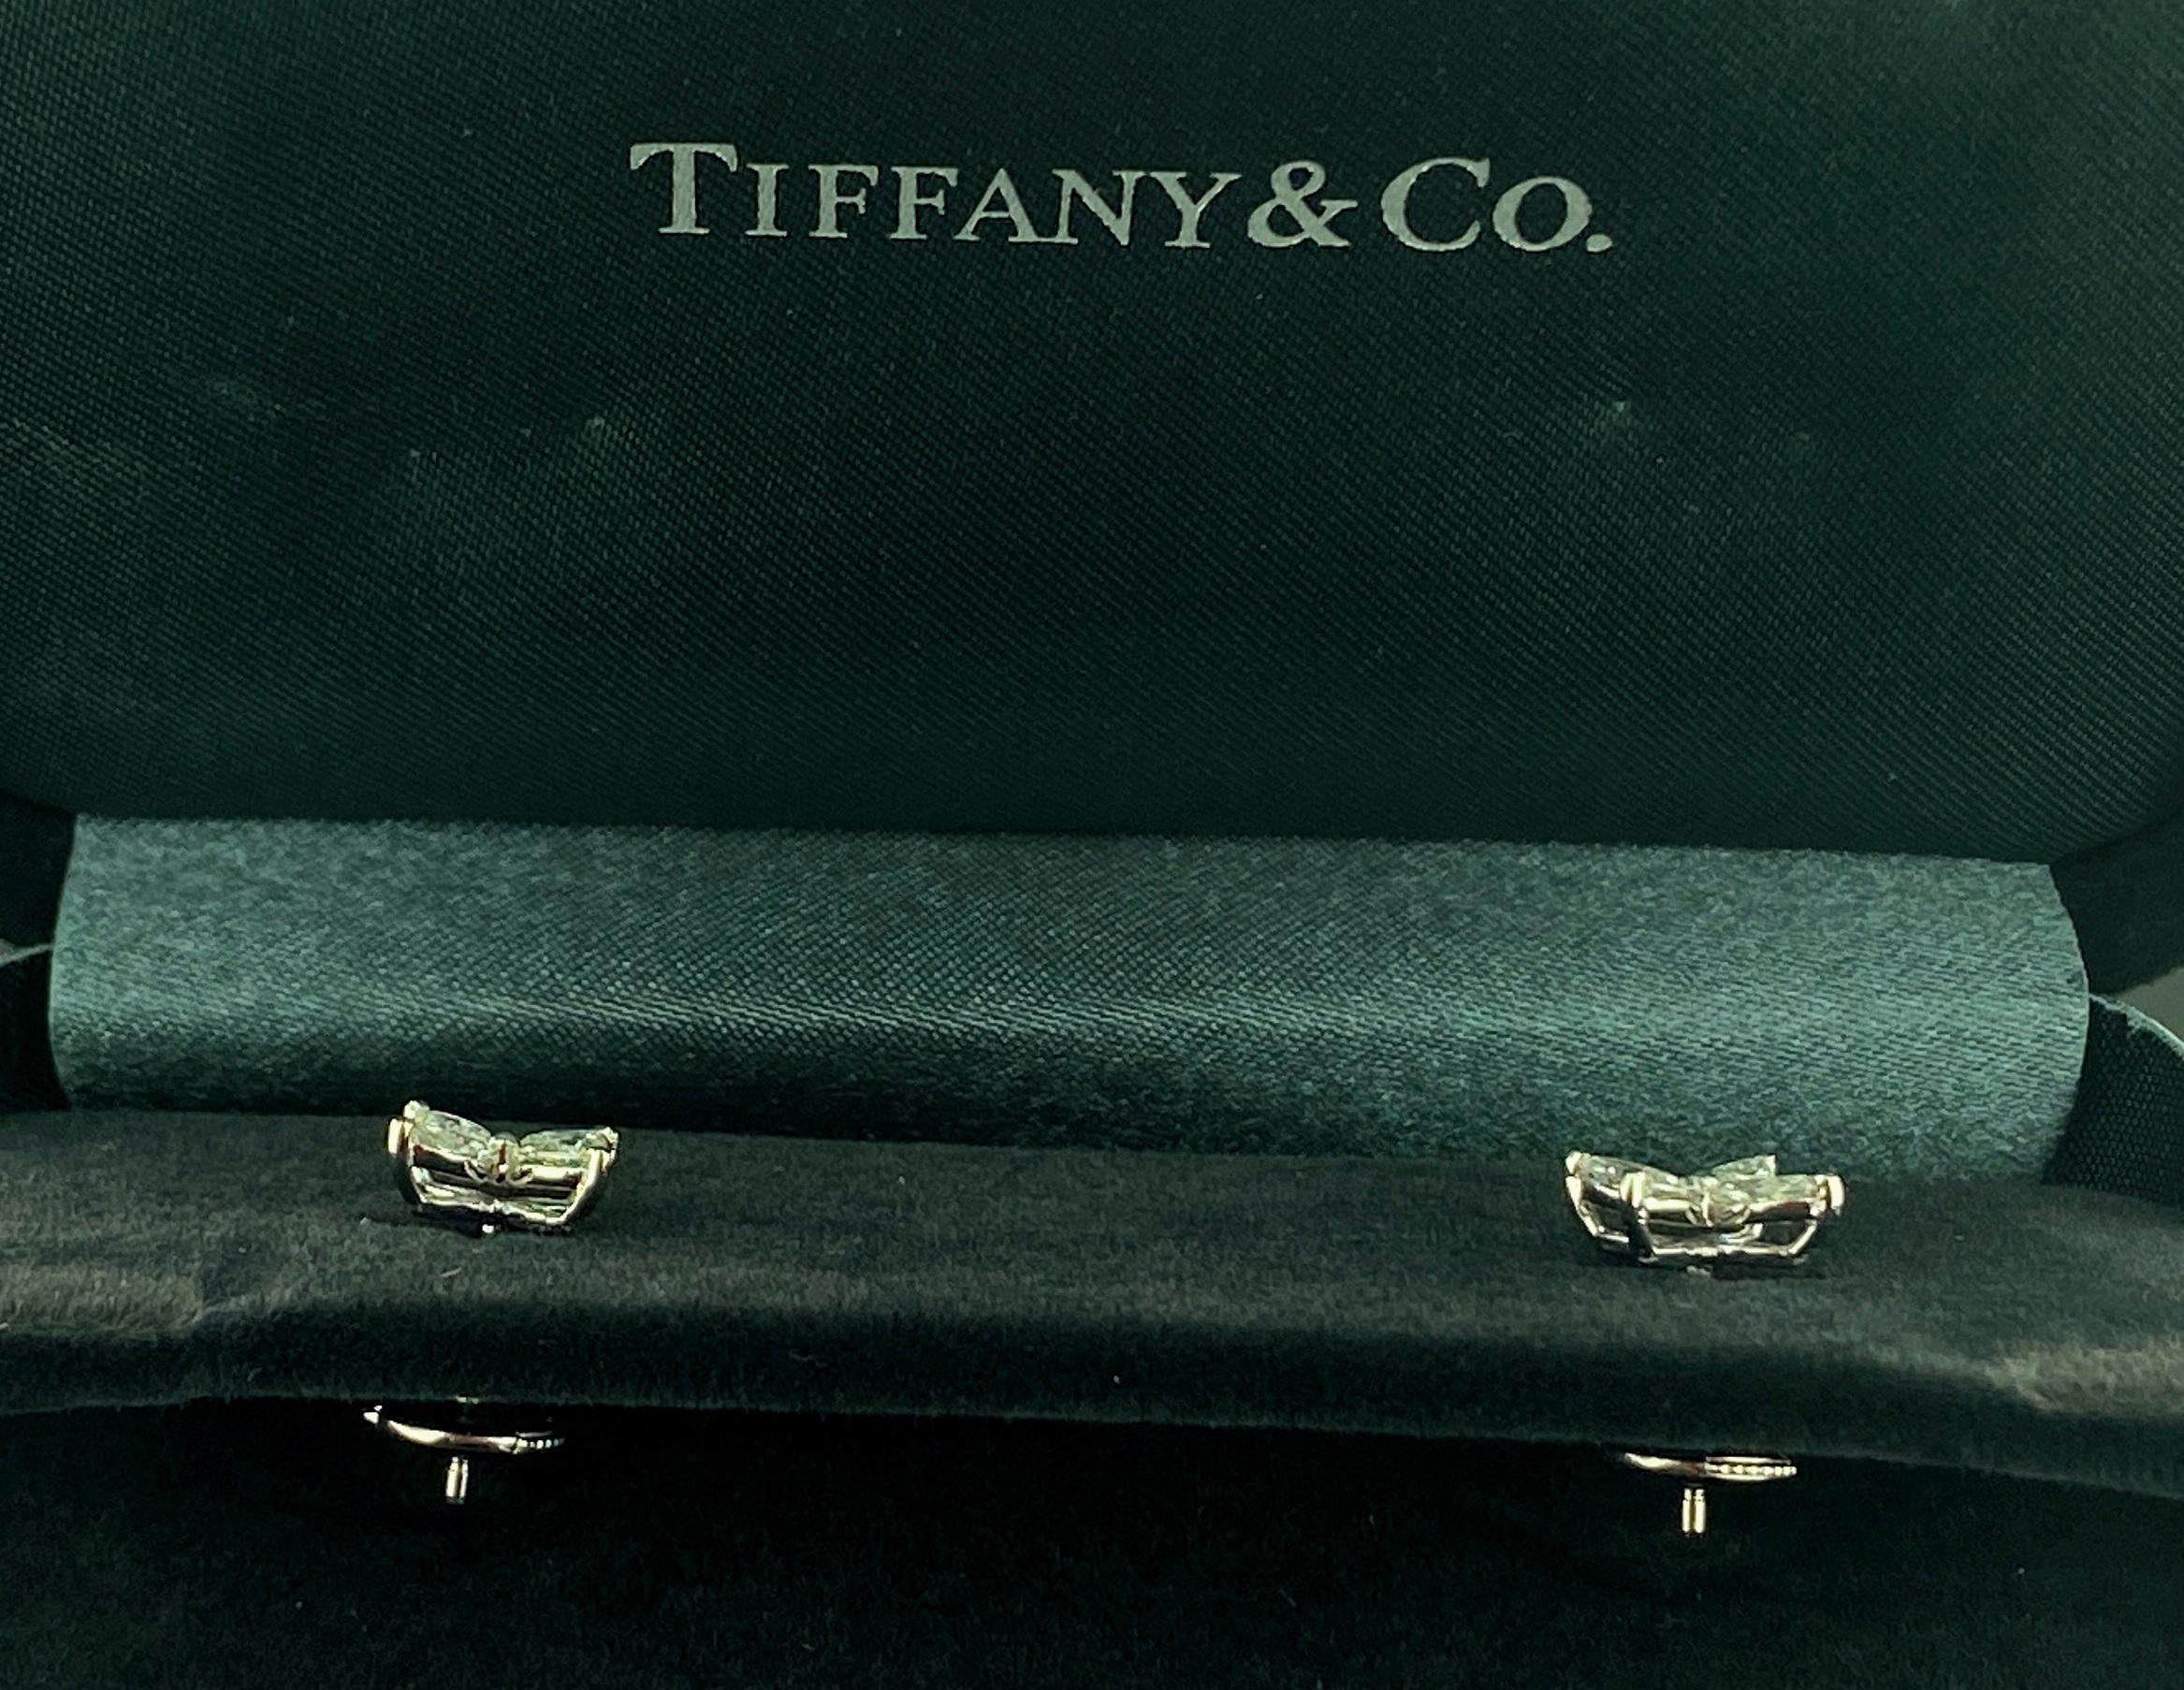 Set in Platinum, these signed Tiffany & Co. earrings from the 